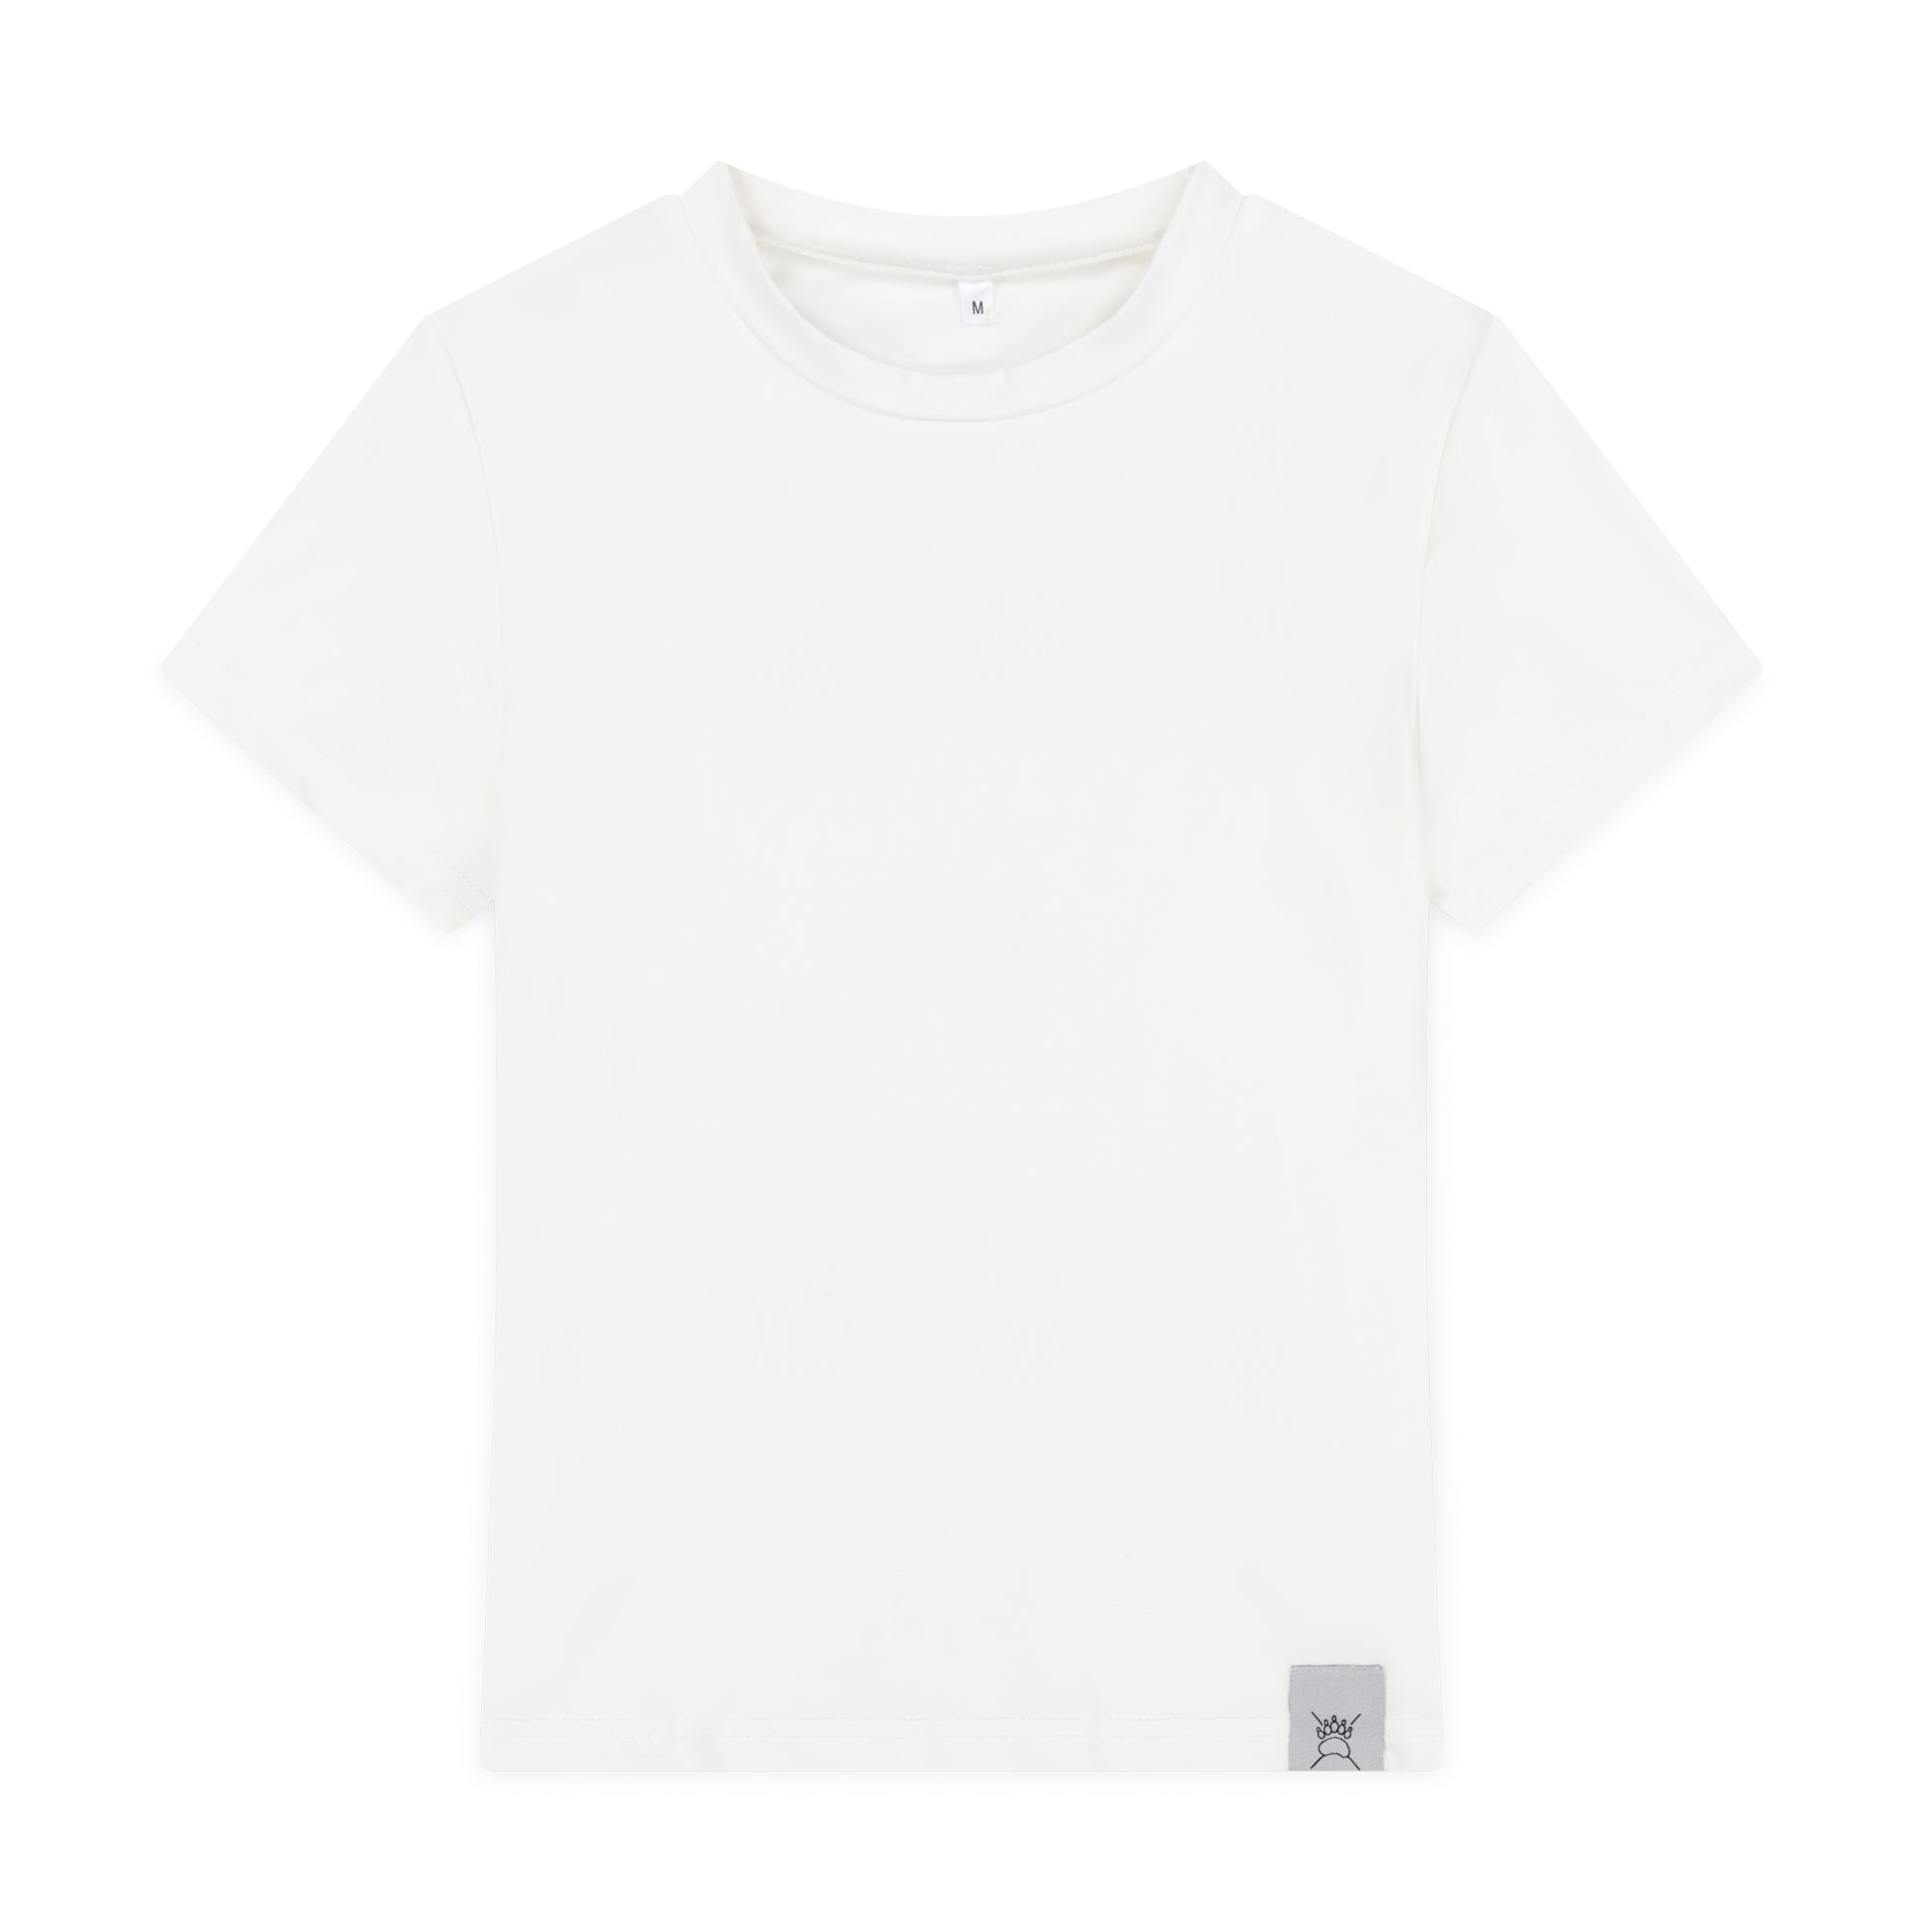 White Crop T-Shirt | White Crop Top | The Survival Couture